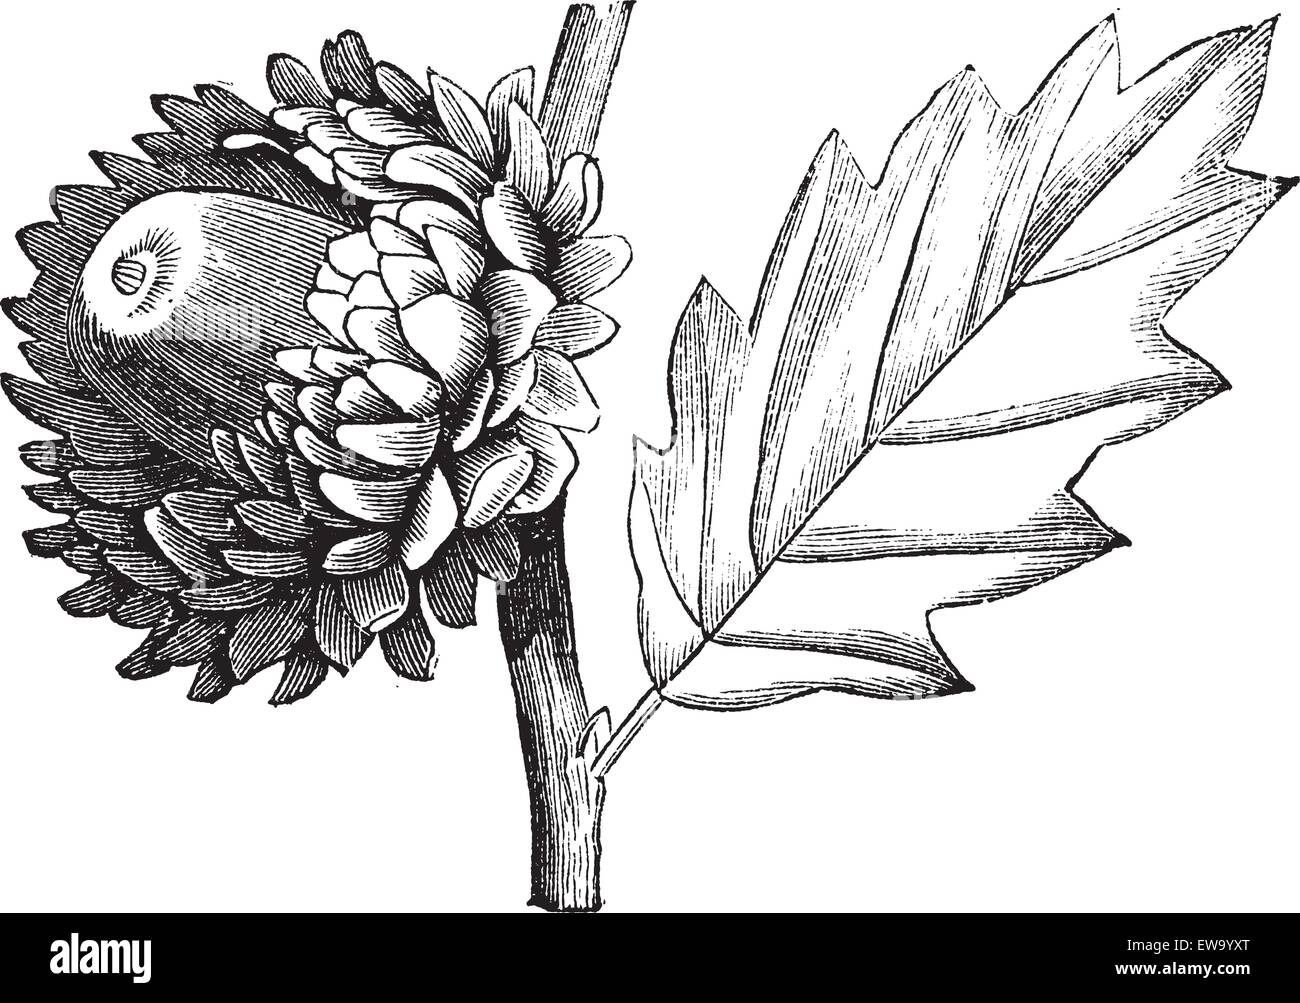 Valonia Oak or Quercus macrolepis, vintage engraving. Old engraved illustration of Valonia Oak showing flower with cup-shaped acorn. Stock Vector